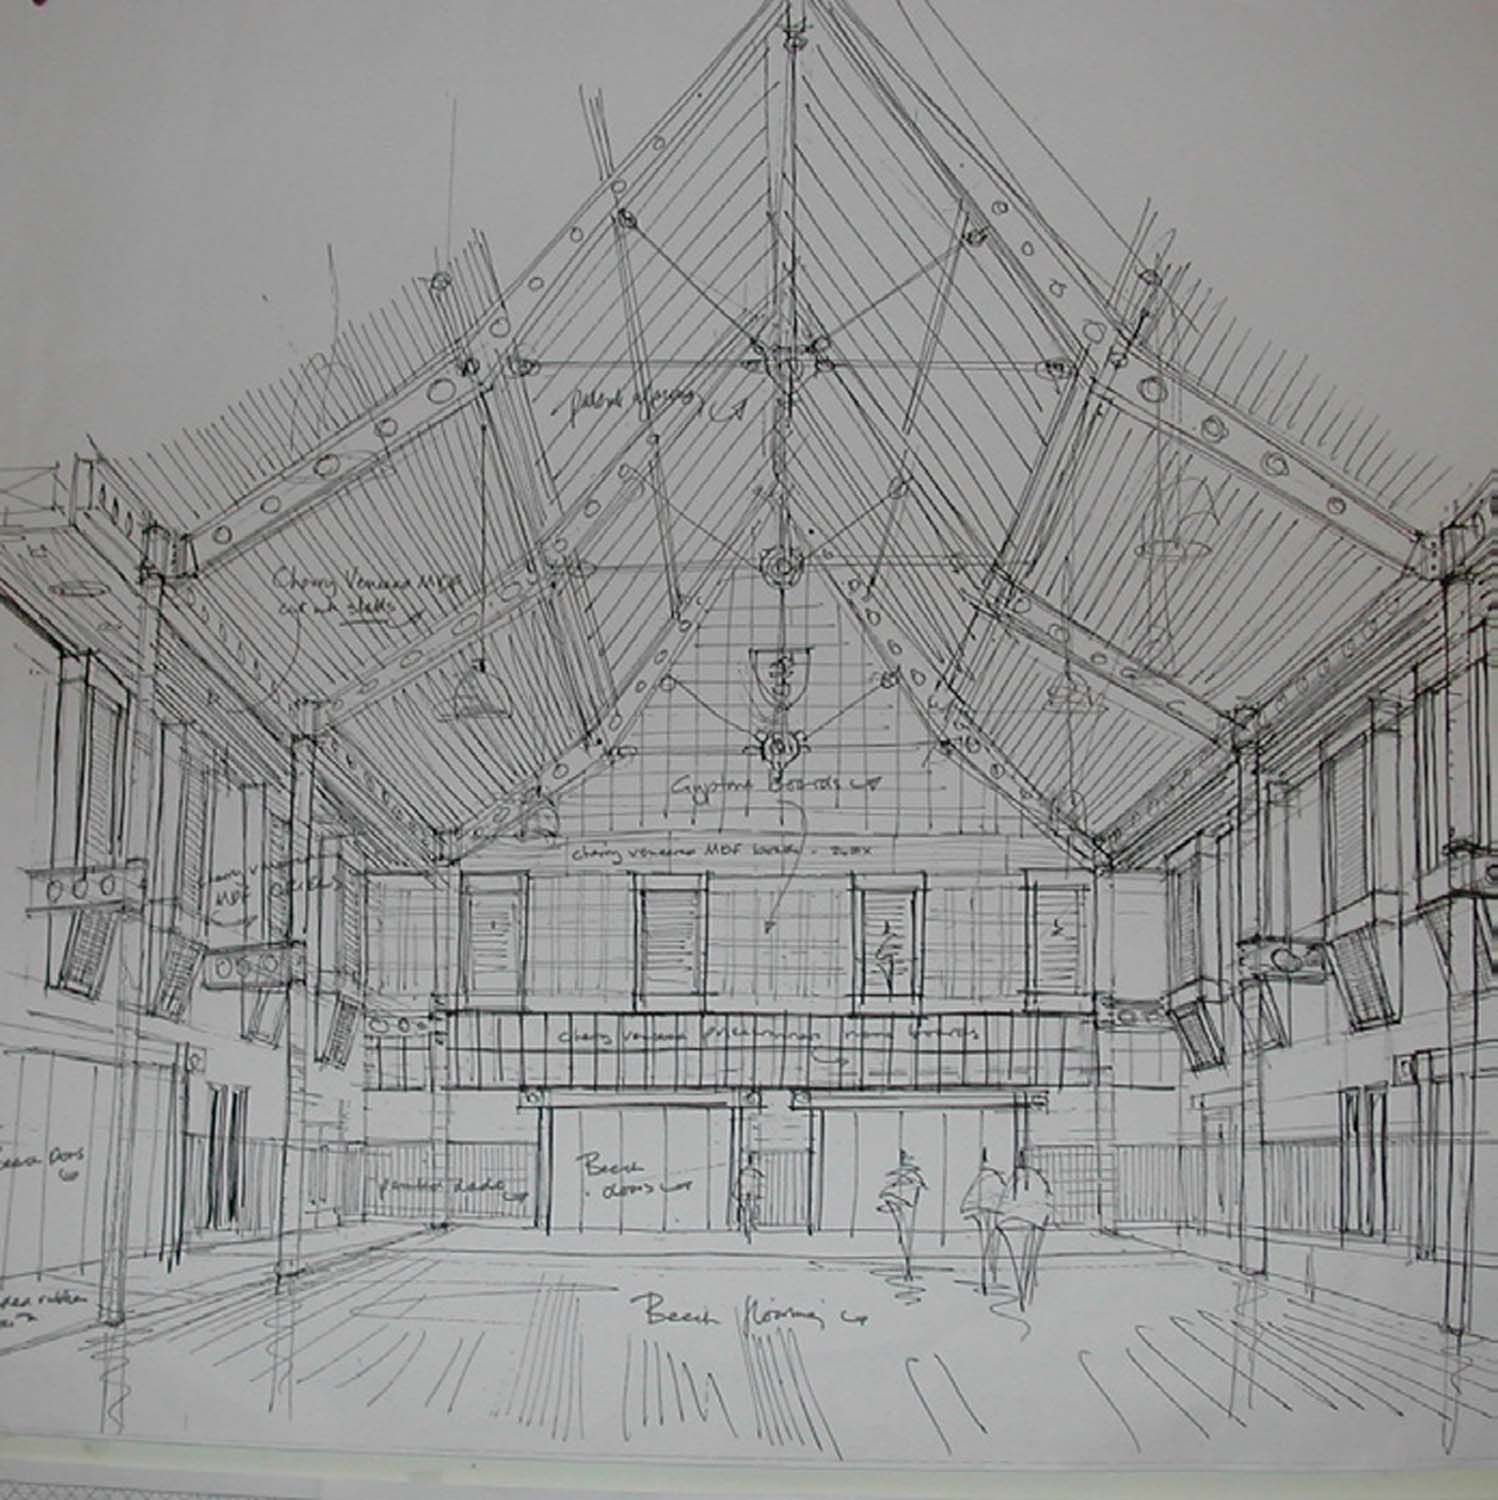 A black and white sketch drawing of the interior of Morgan Academy 